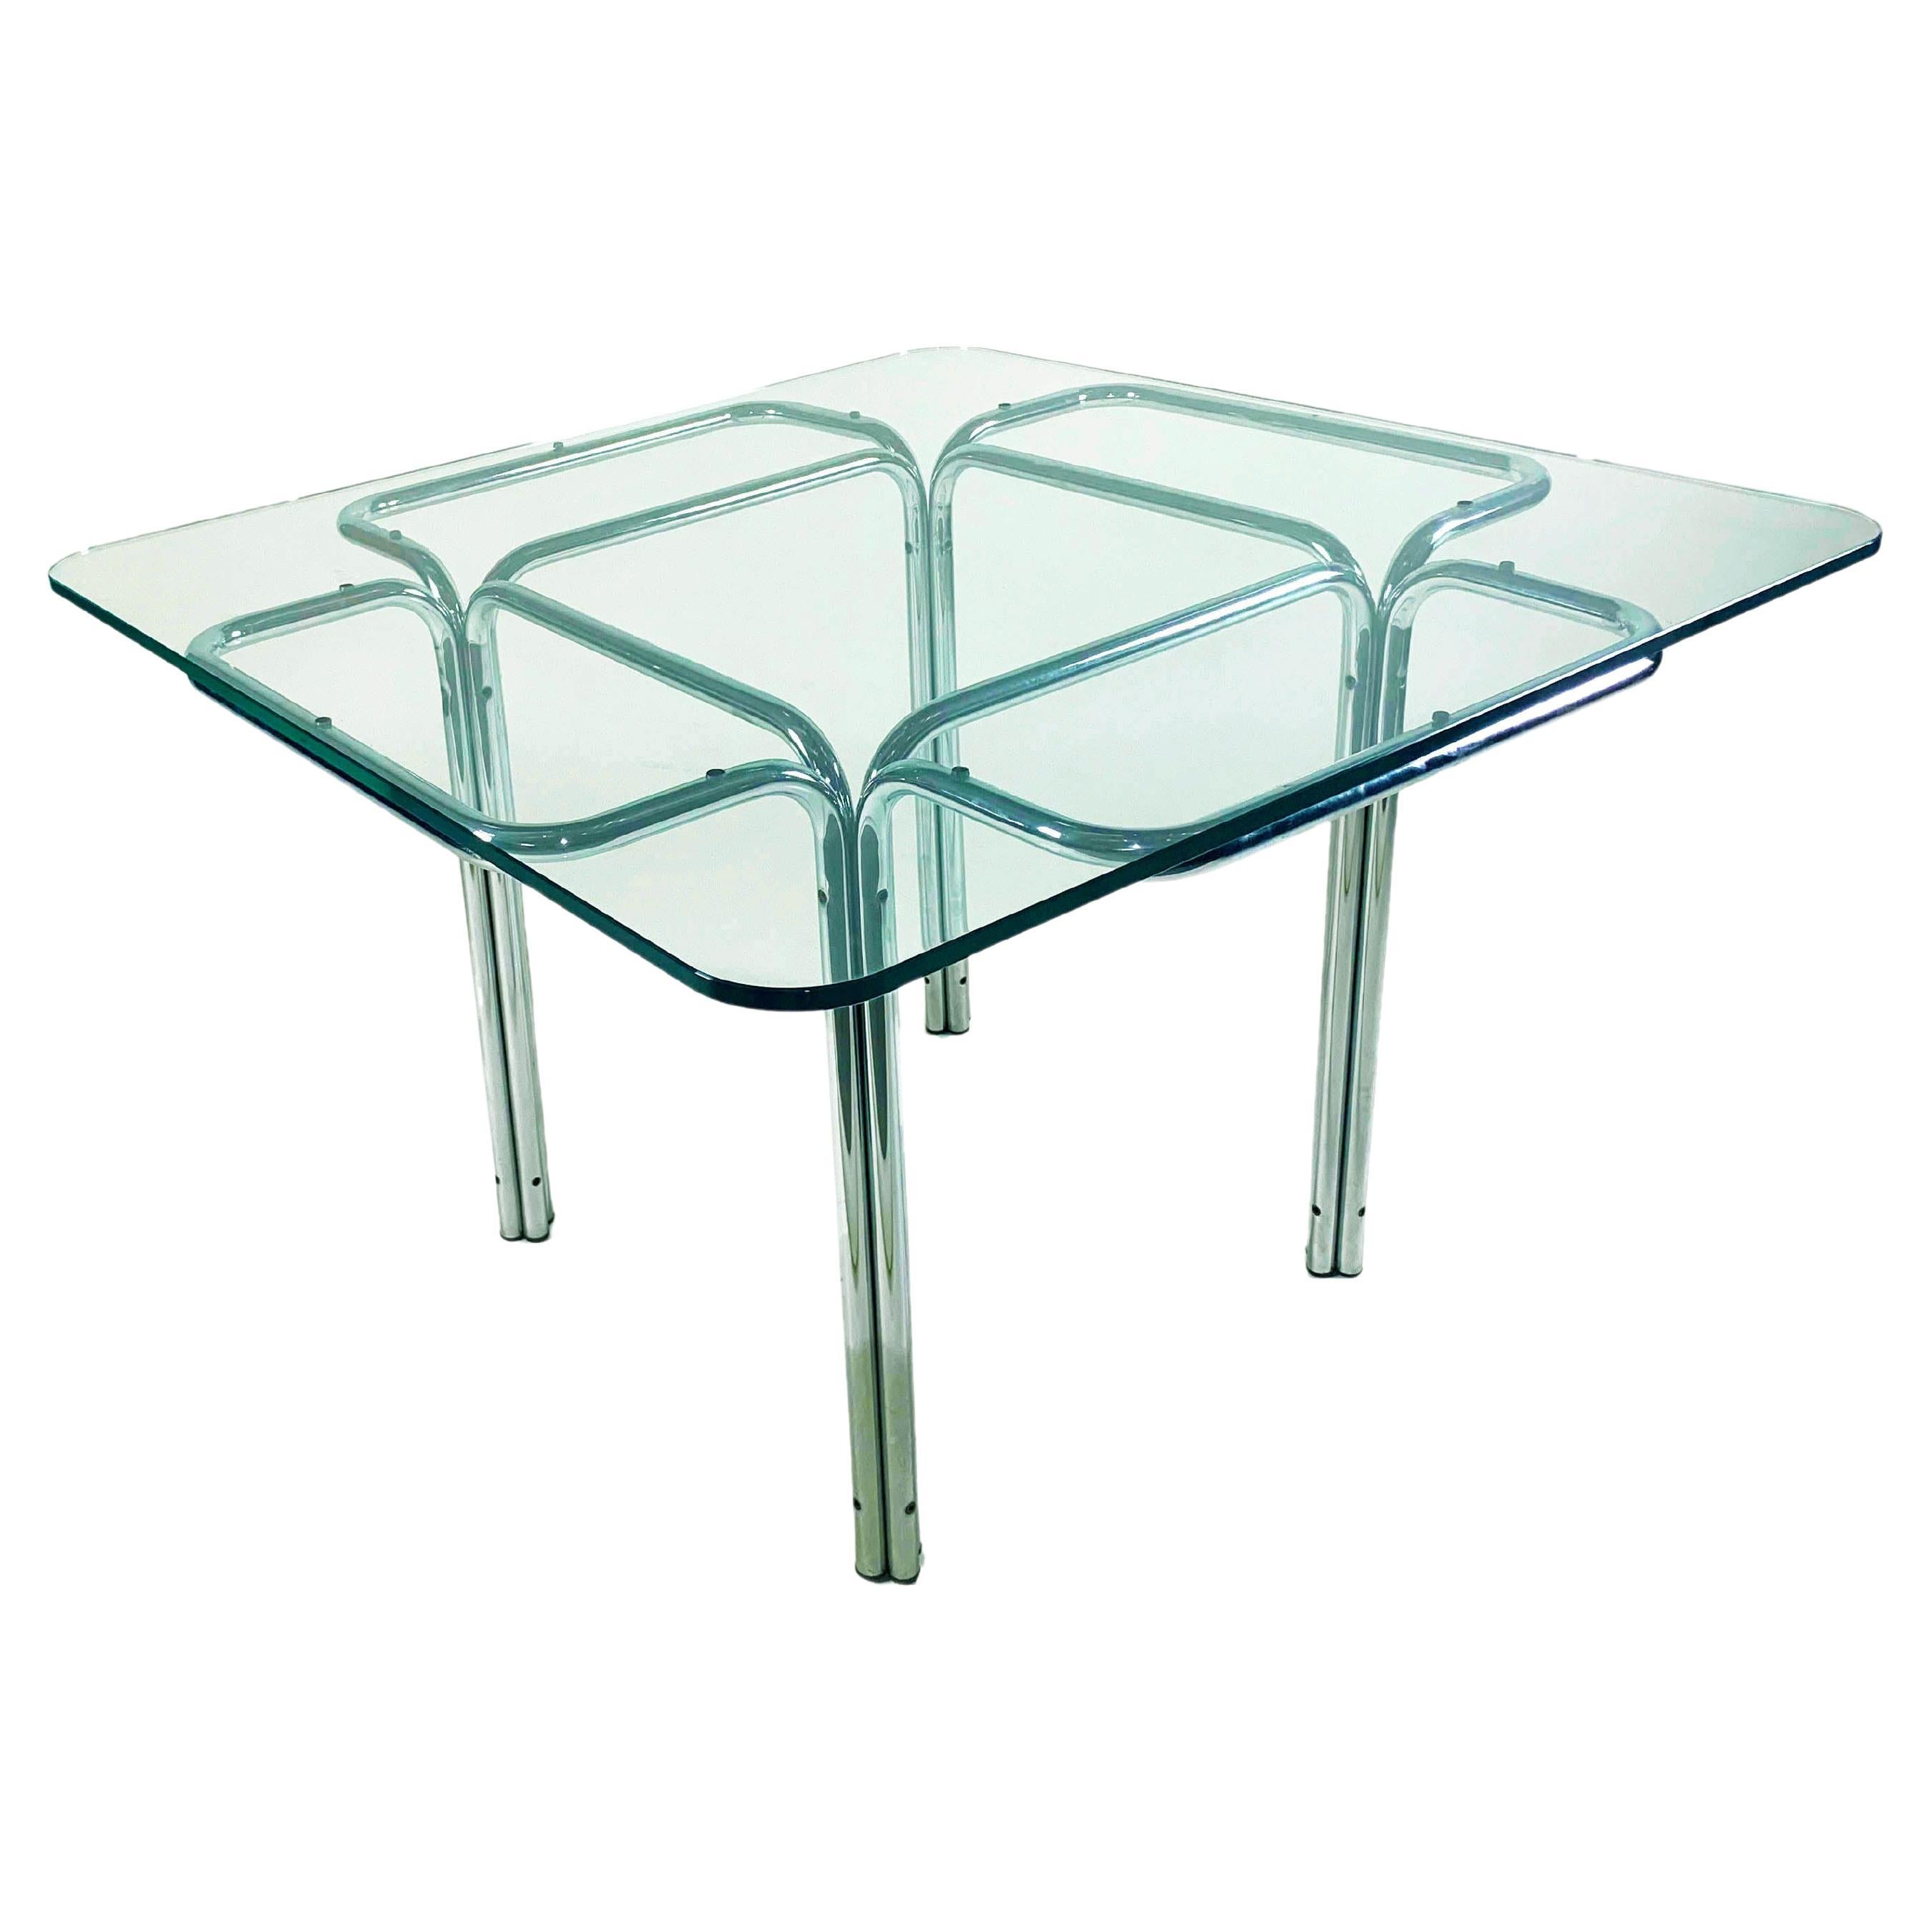 Topos table by Gruppo Dam for Gruppo Industriale Busnelli, 1969 For Sale